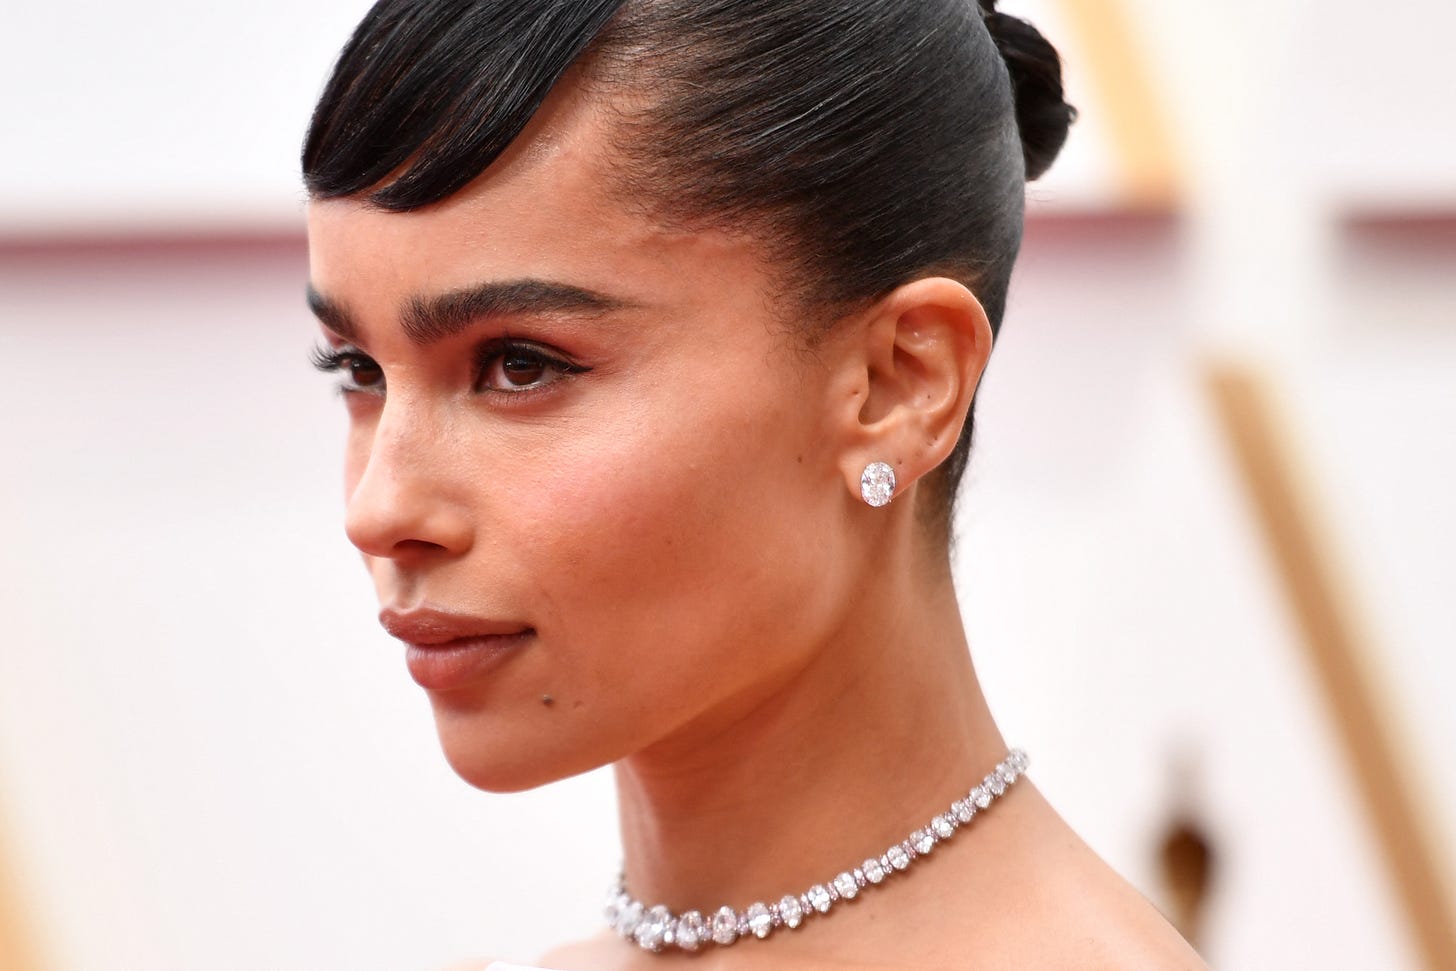 Zoe Kravitz with her hair in a bun and wearing diamond earrings and a necklace.